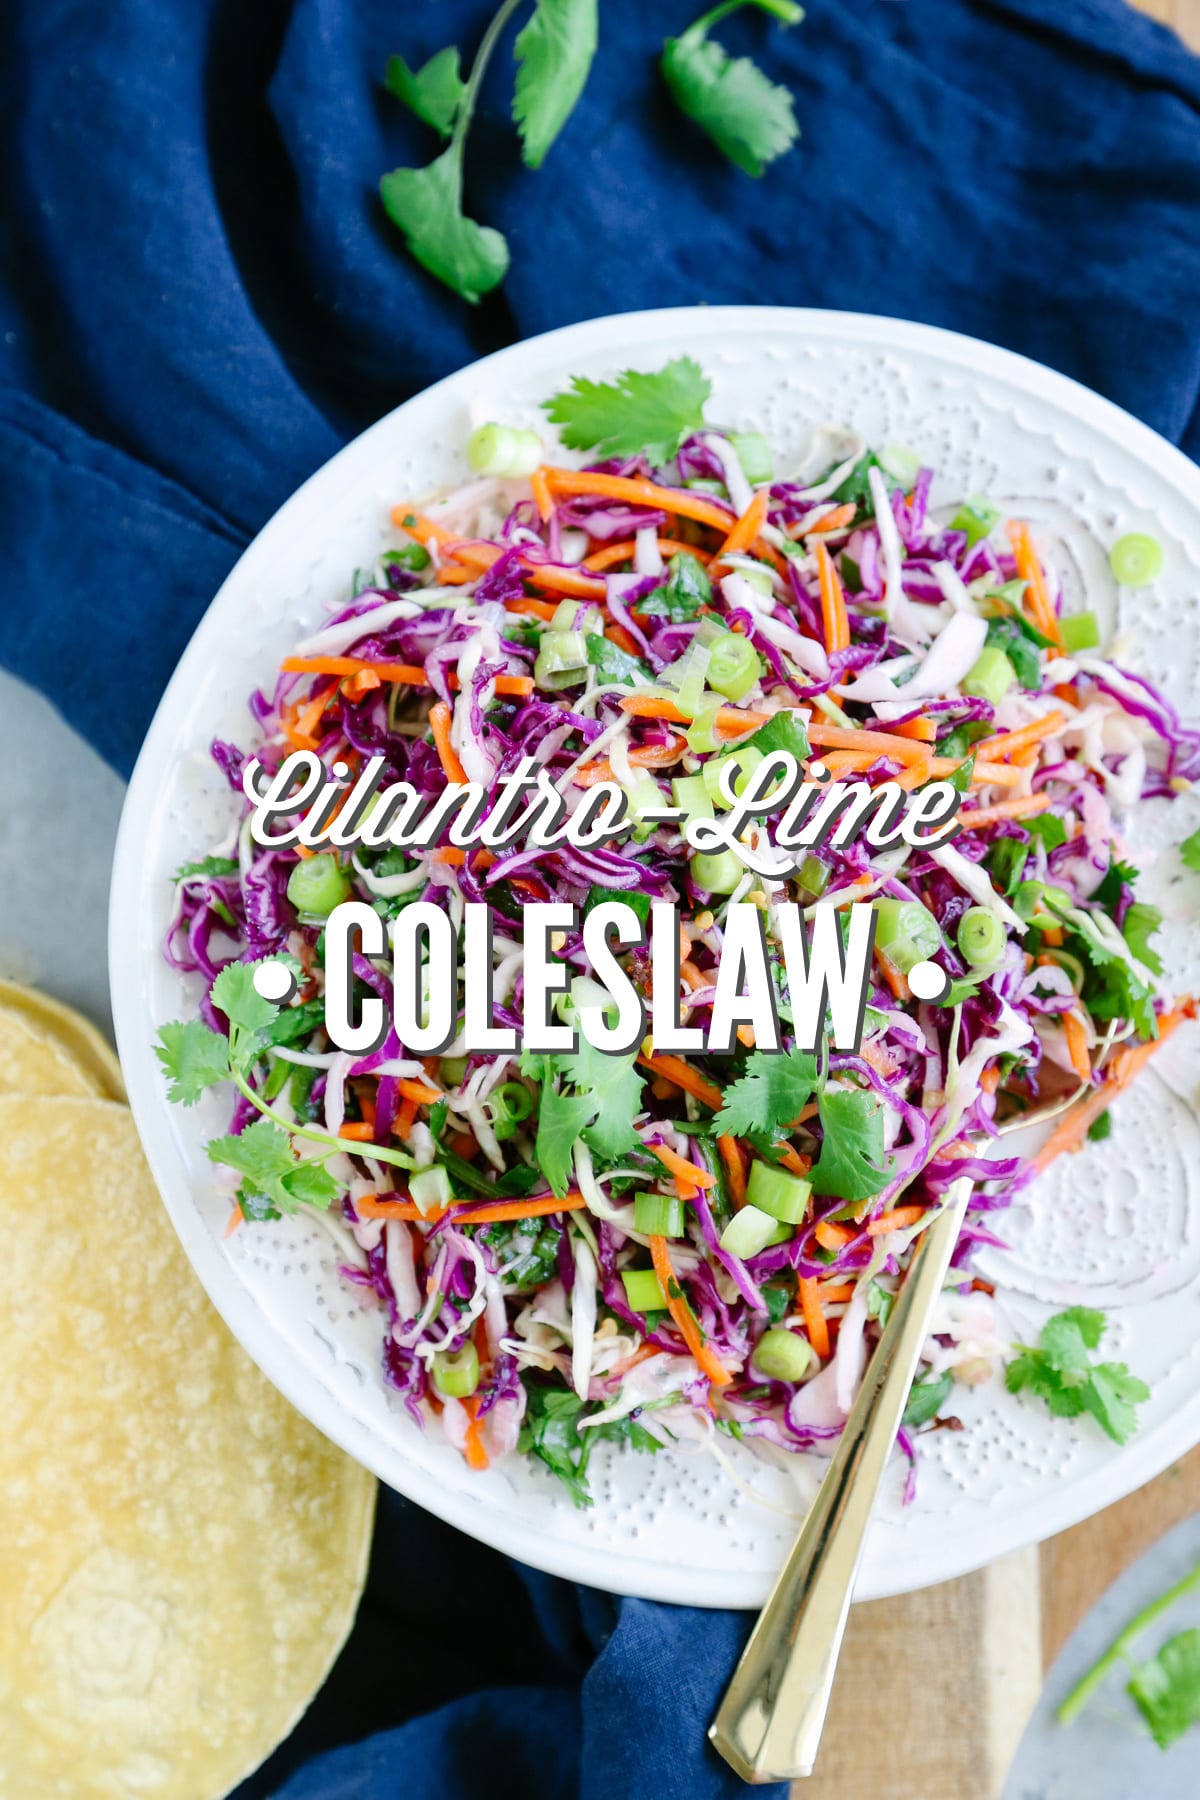 Cilantro-Lime Coleslaw (For Tacos, Sandwiches, or a Side Salad)